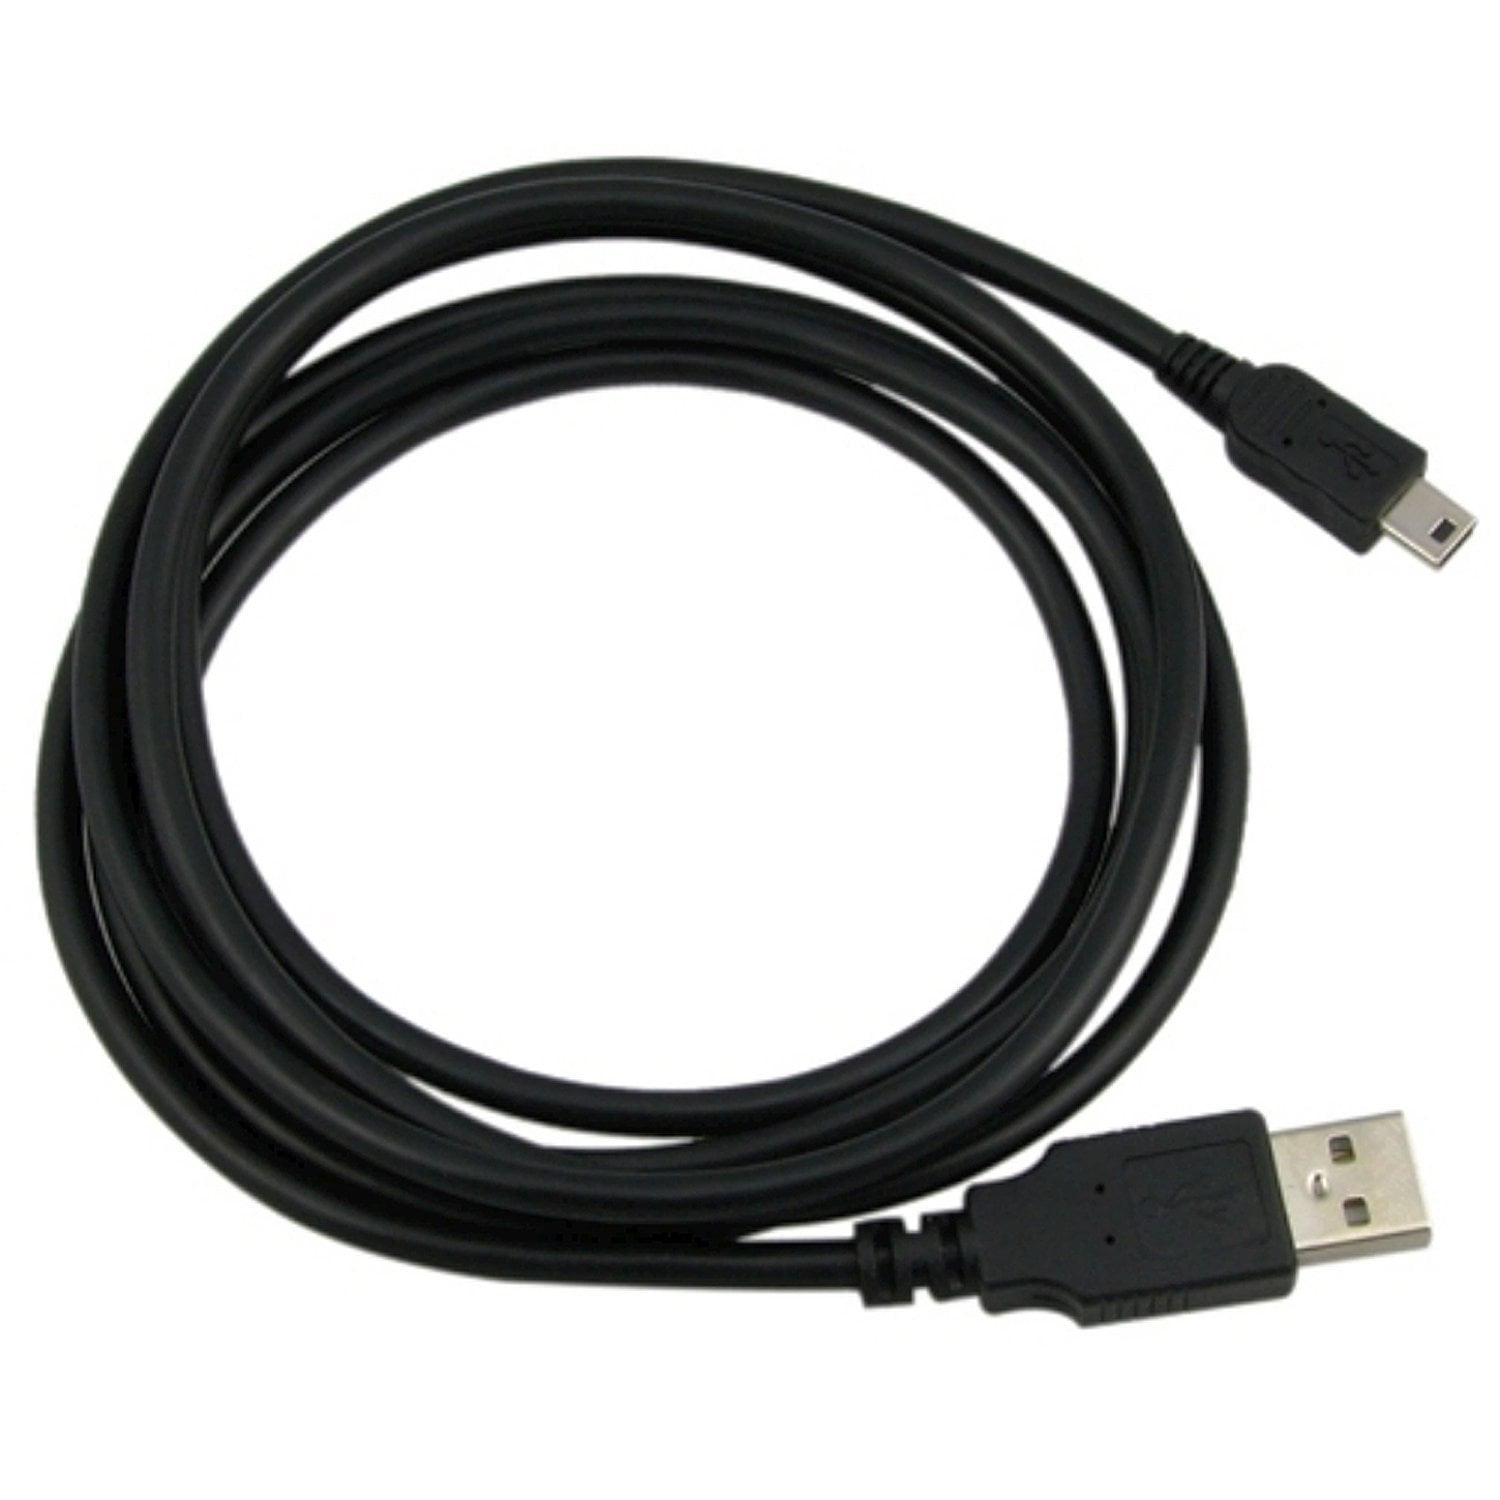 HP USB Cable Lead for Photosmart R507 R727 R967 